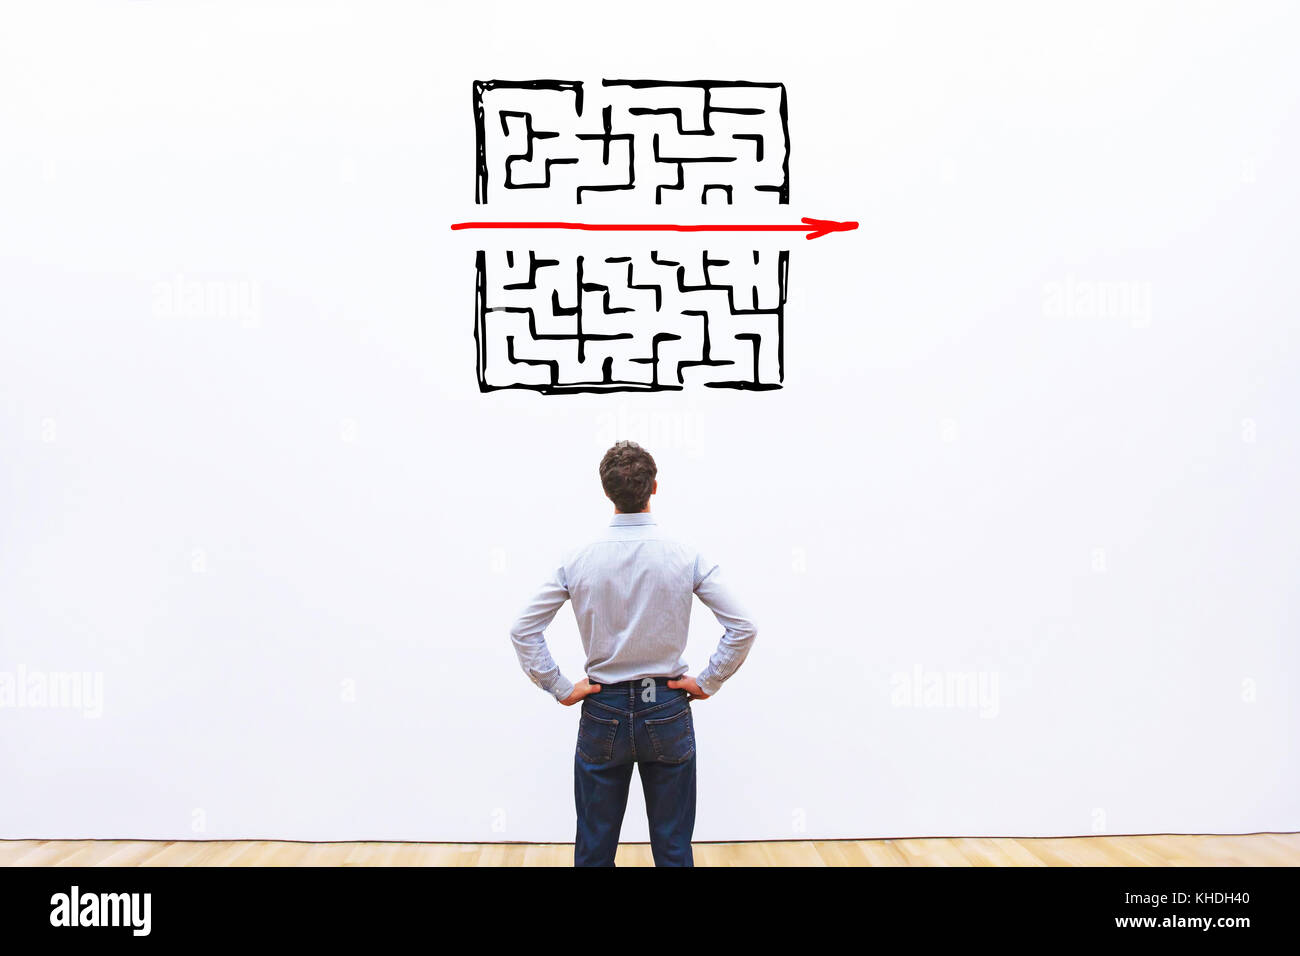 problem and solution concept, business man thinking about exit from complex labyrinth Stock Photo